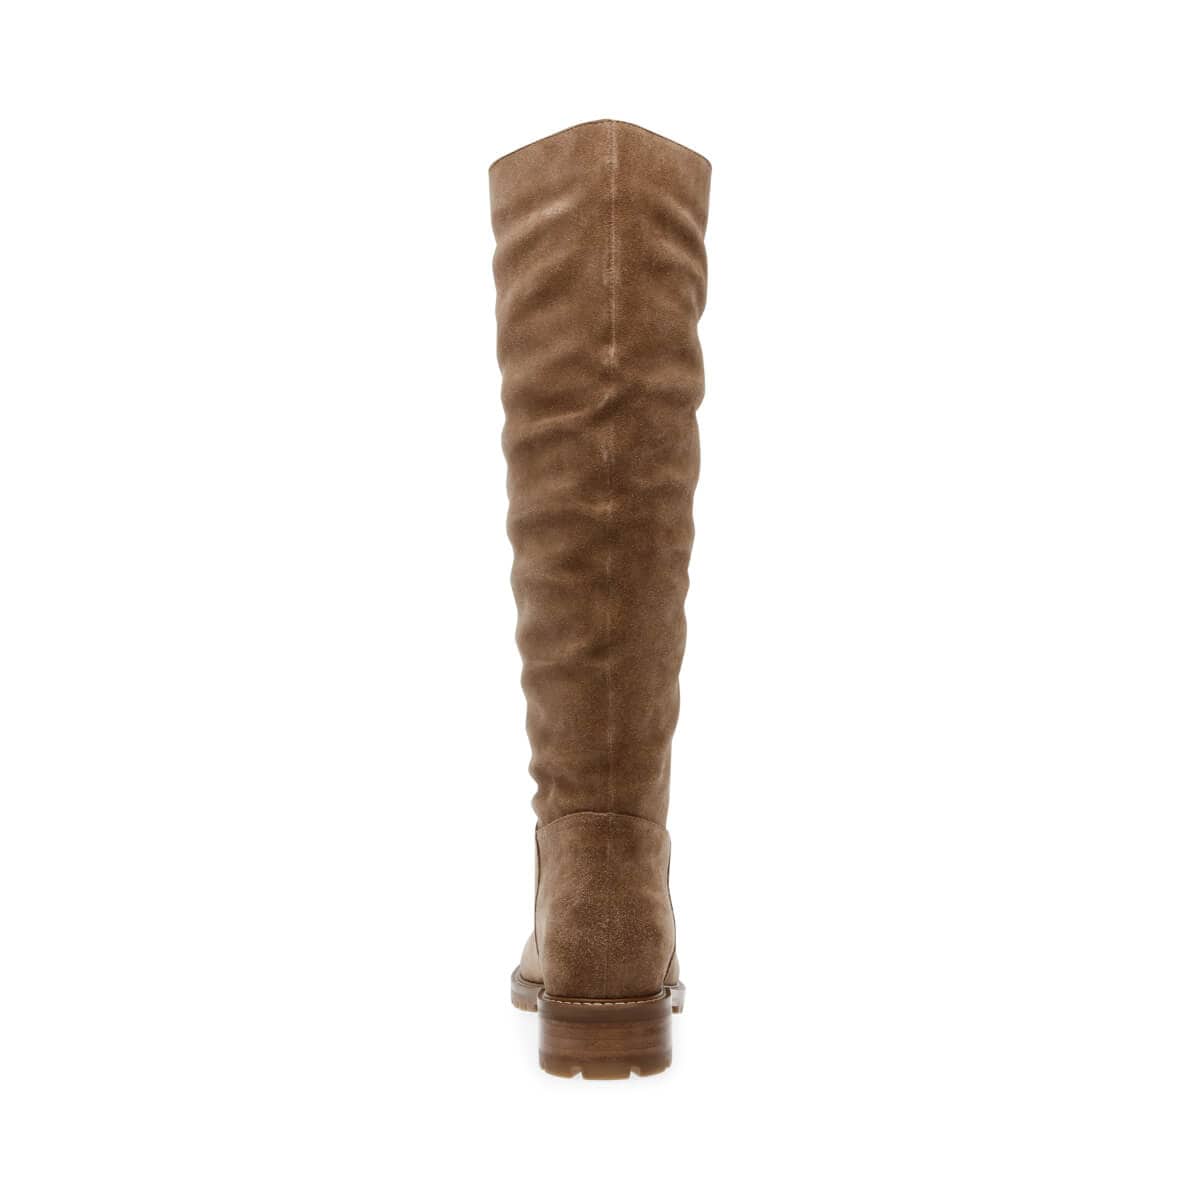 Steve Madden Loralye Tall Boot oatmeal back | MILK MONEY milkmoney.co | cute shoes for women. ladies shoes. nice shoes for women. footwear for women. ladies shoes online. ladies footwear. womens shoes and boots. pretty shoes for women. beautiful shoes for women.